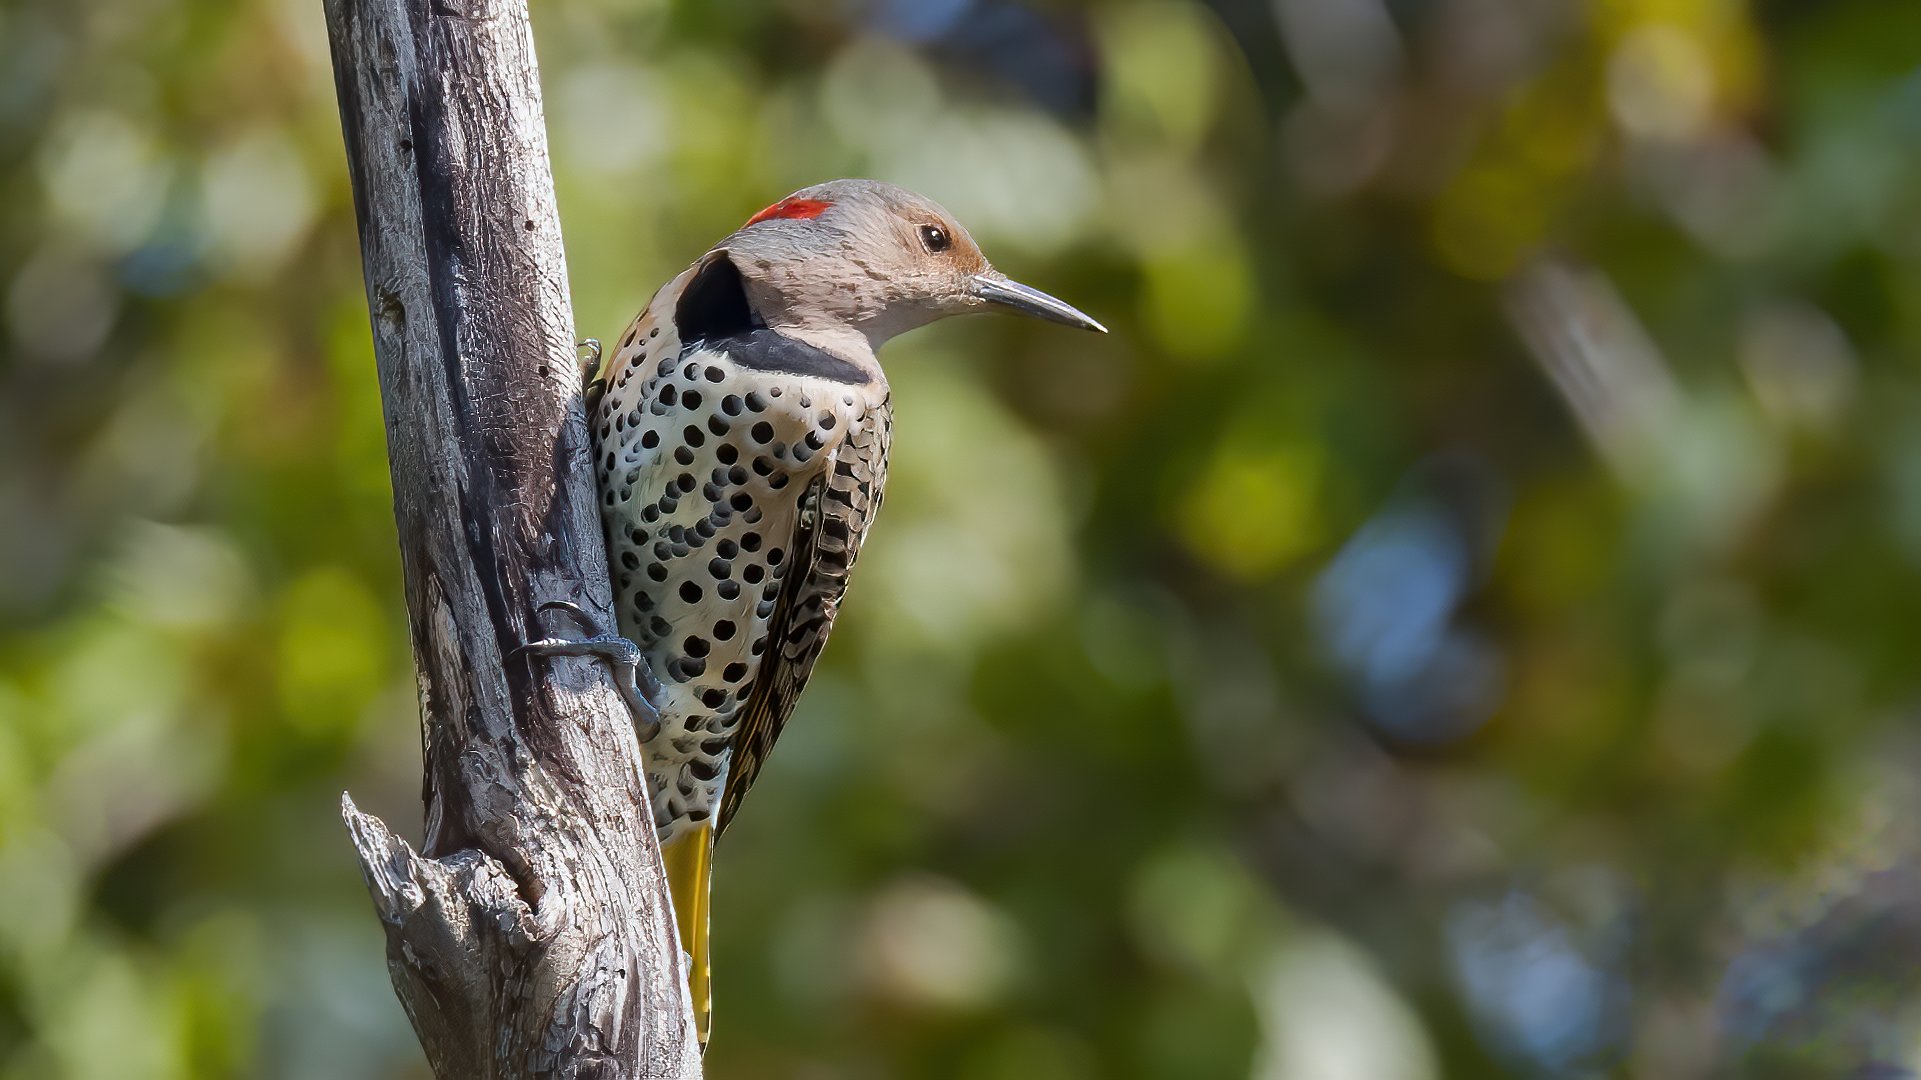 17 A northern flicker tries to decide where to go next.jpg